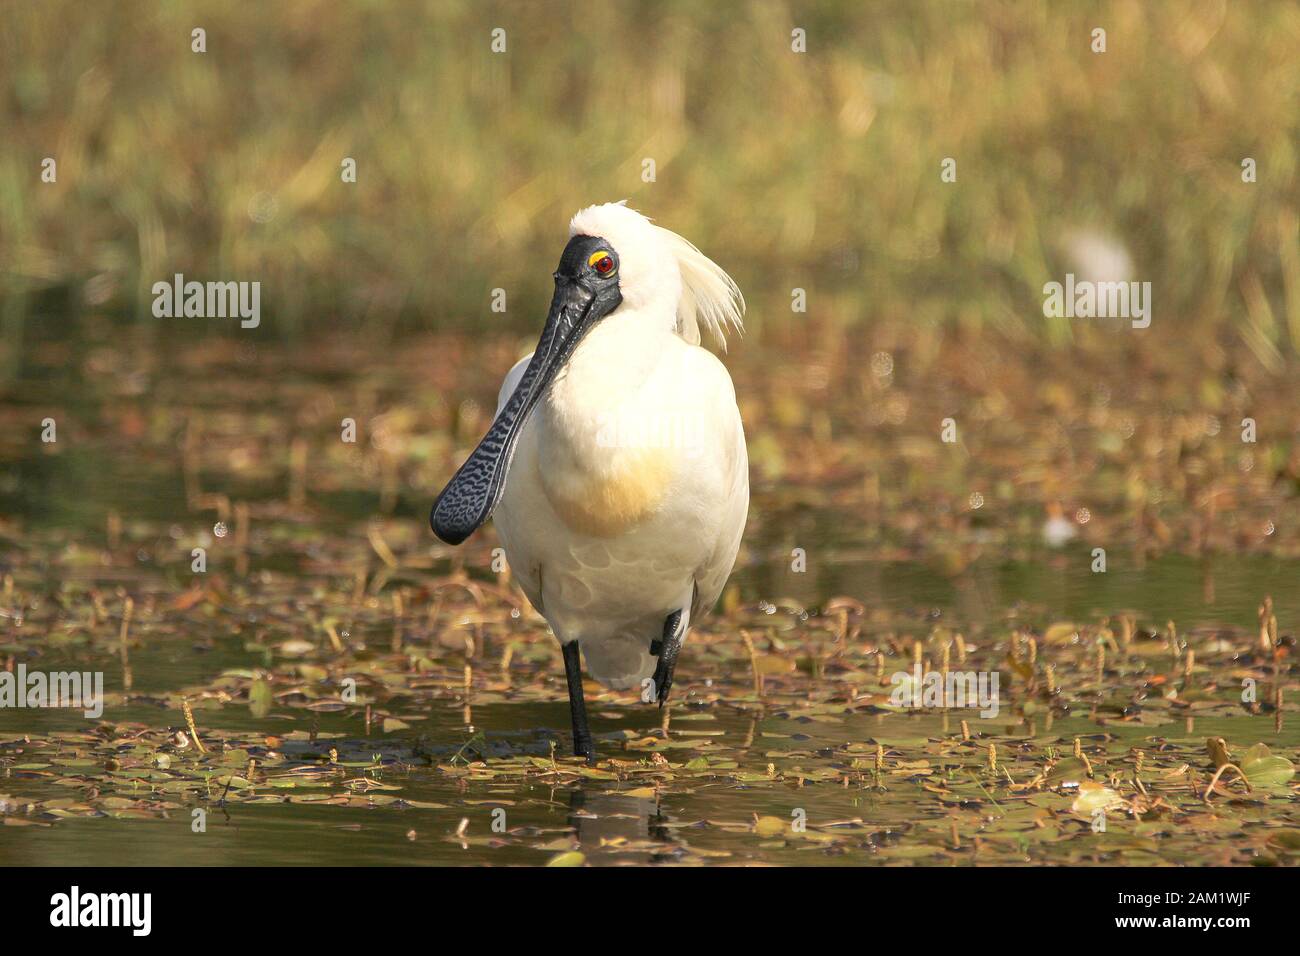 Royal spoonbill (Platalea regia) standing in a pond Stock Photo